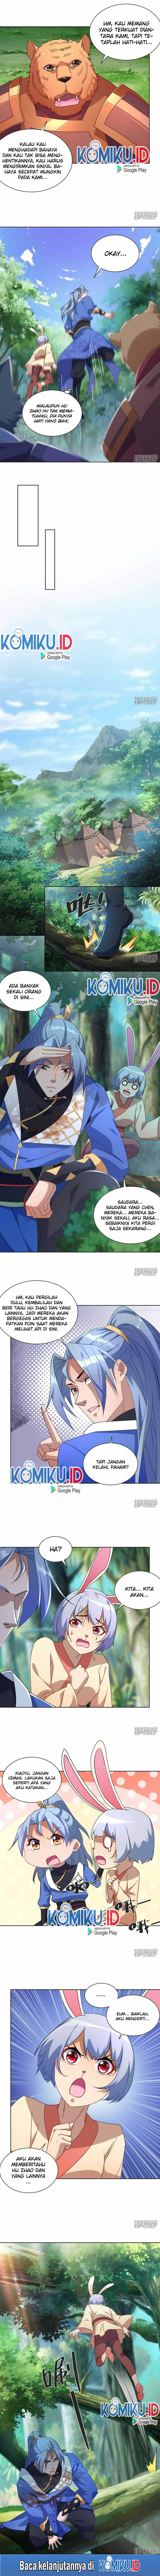 Rebirth After 80.000 Years Passed Chapter 229